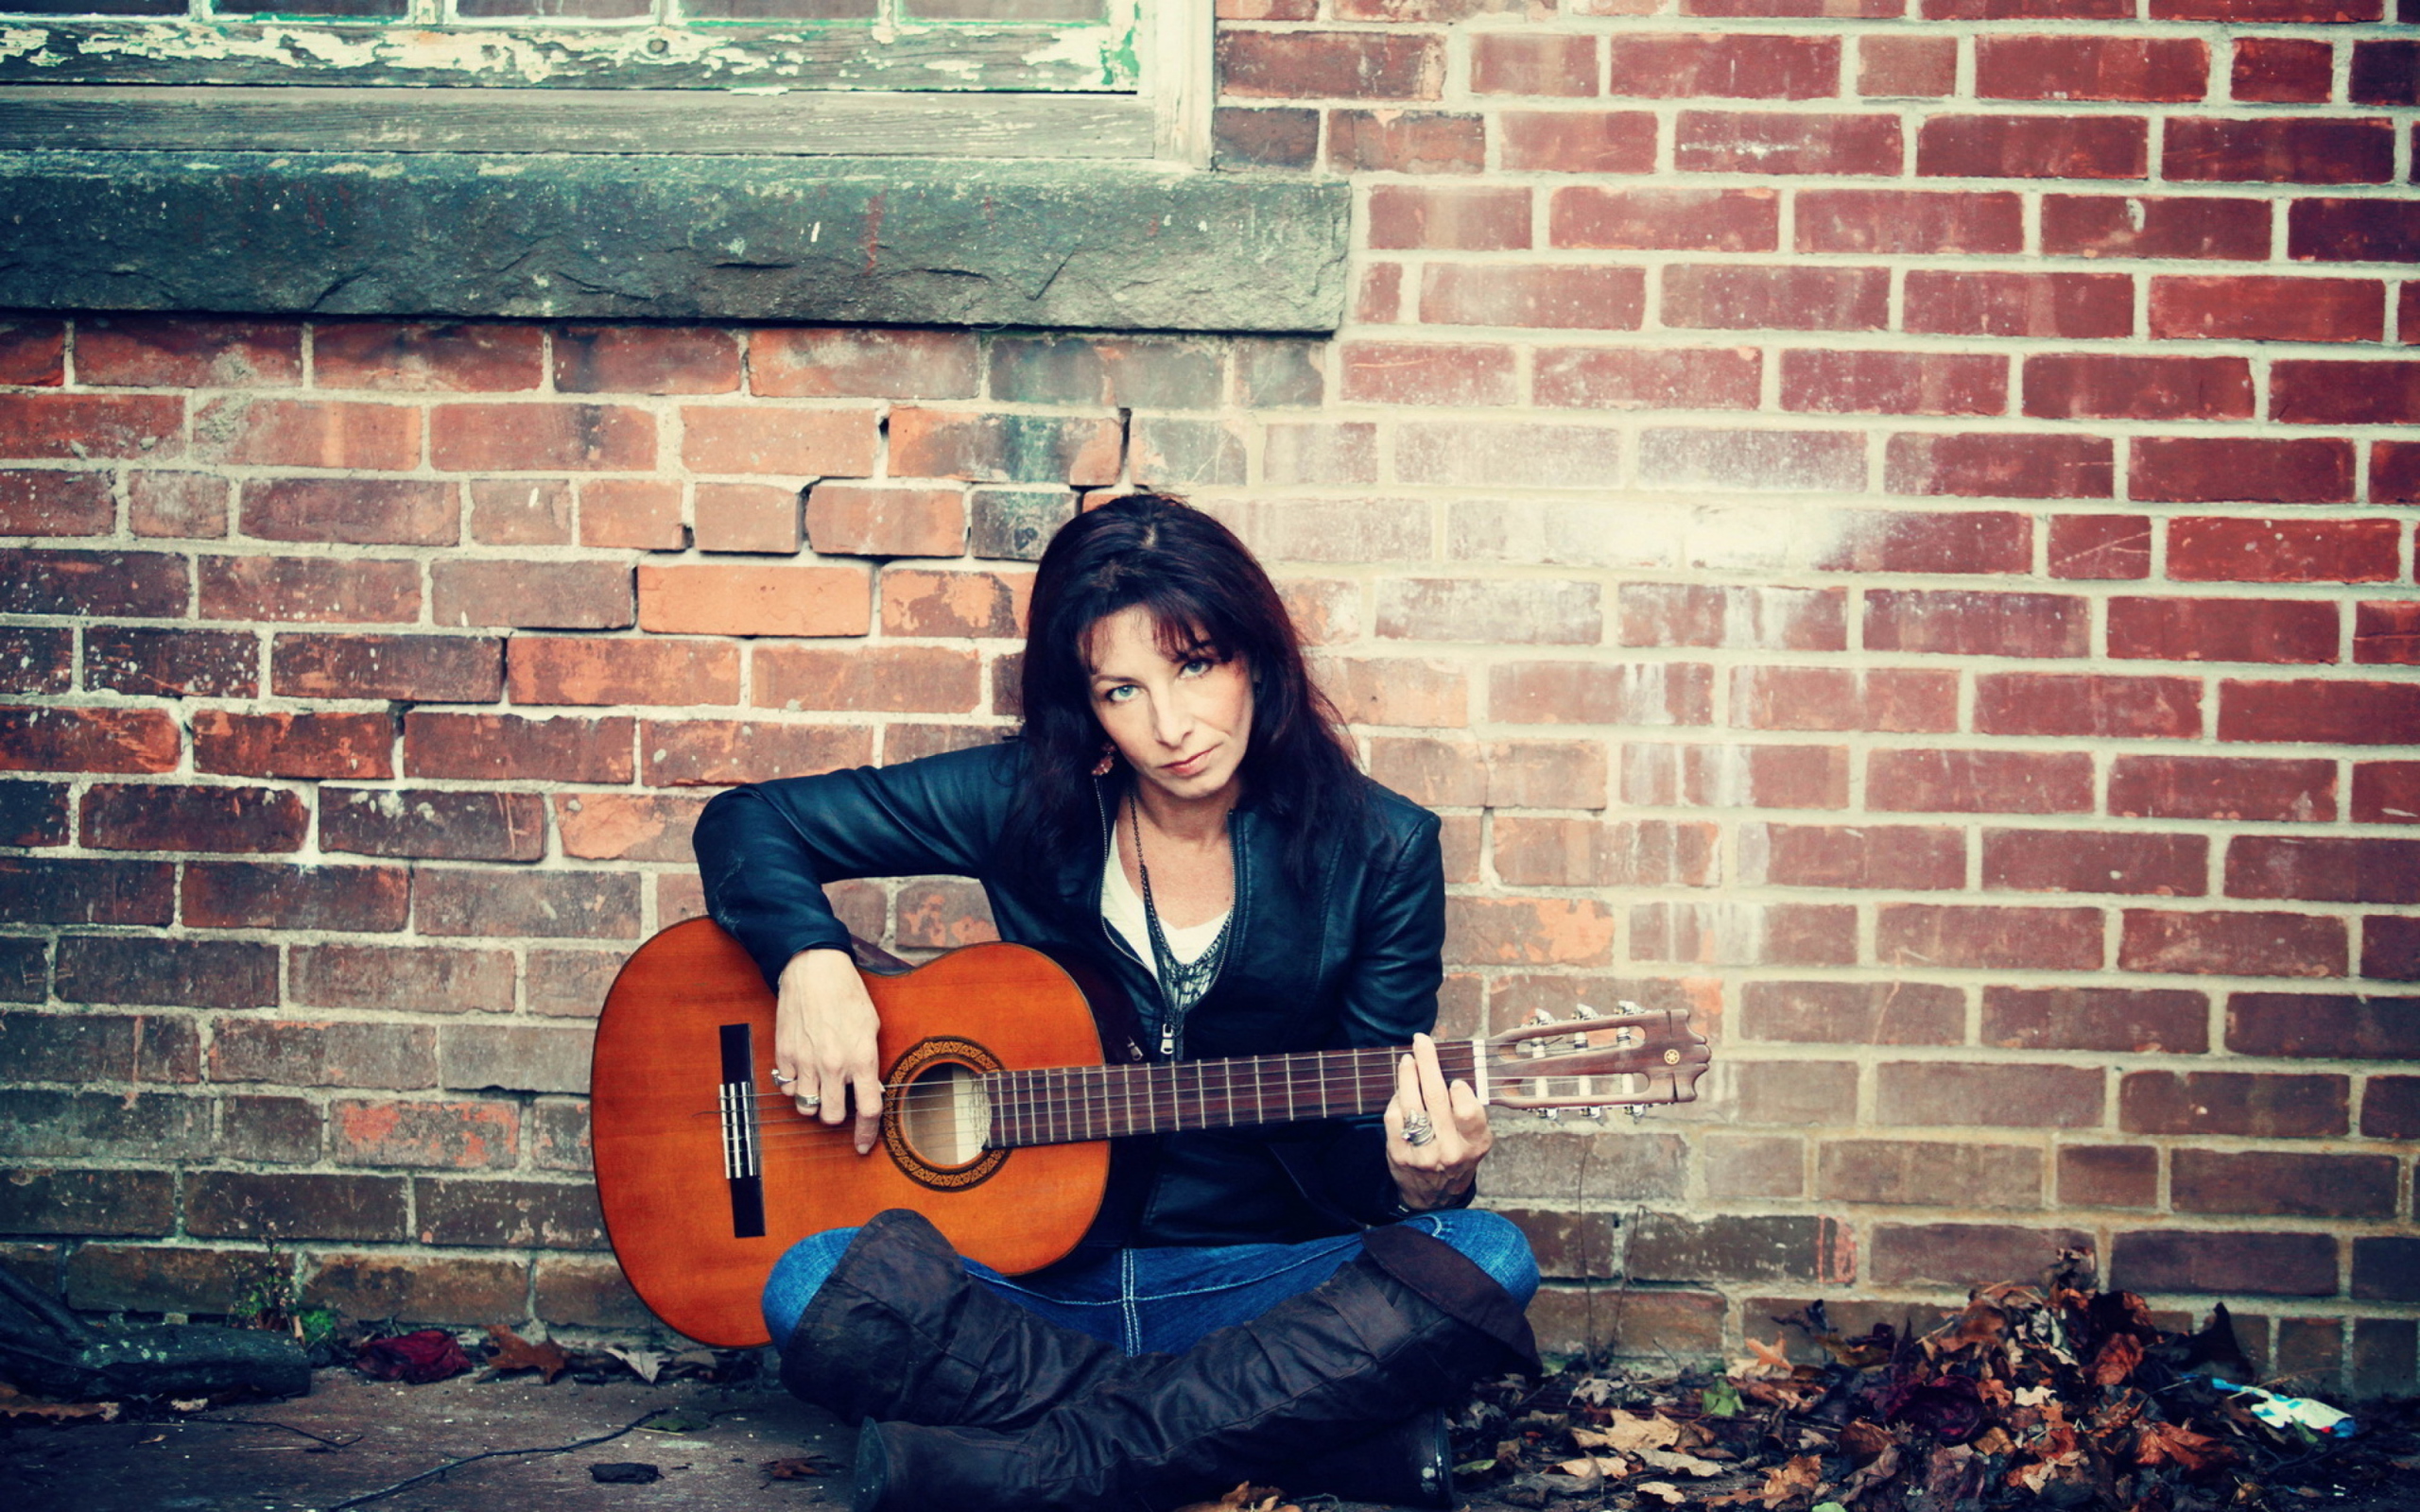 Woman With Guitar wallpaper 2560x1600